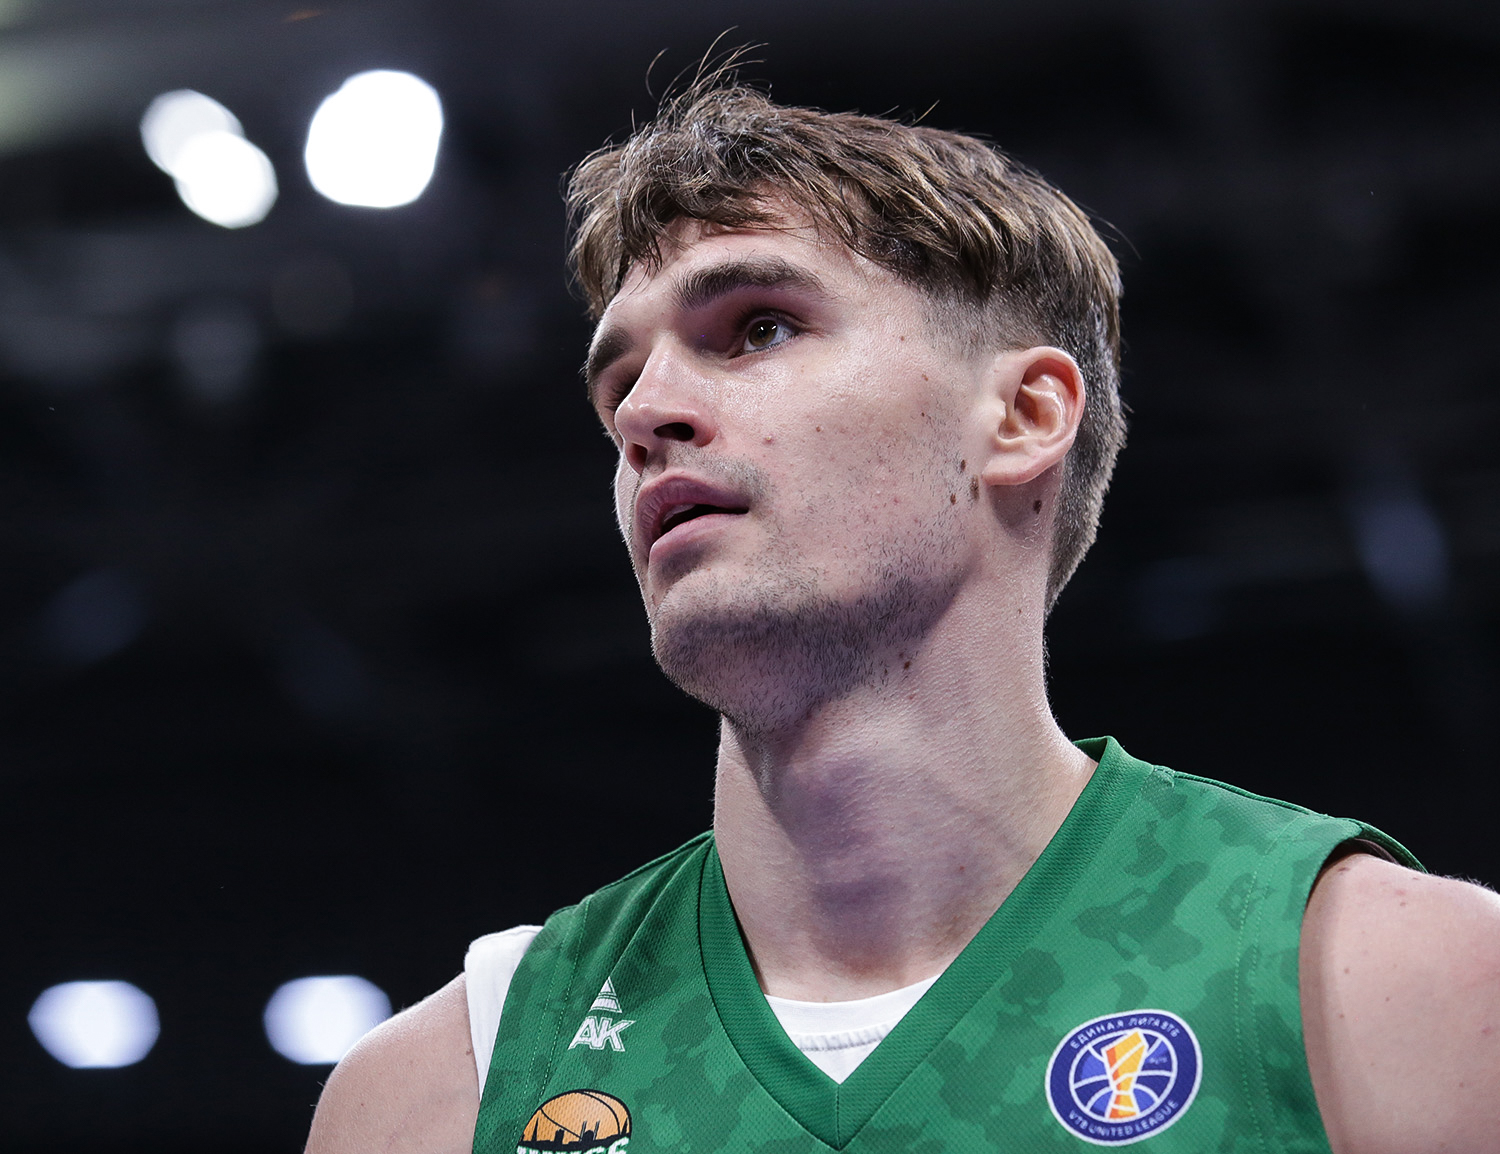 Mario Hezonja will participate in the slam-dunk and three-point contests at the 2022 All-Star Game!